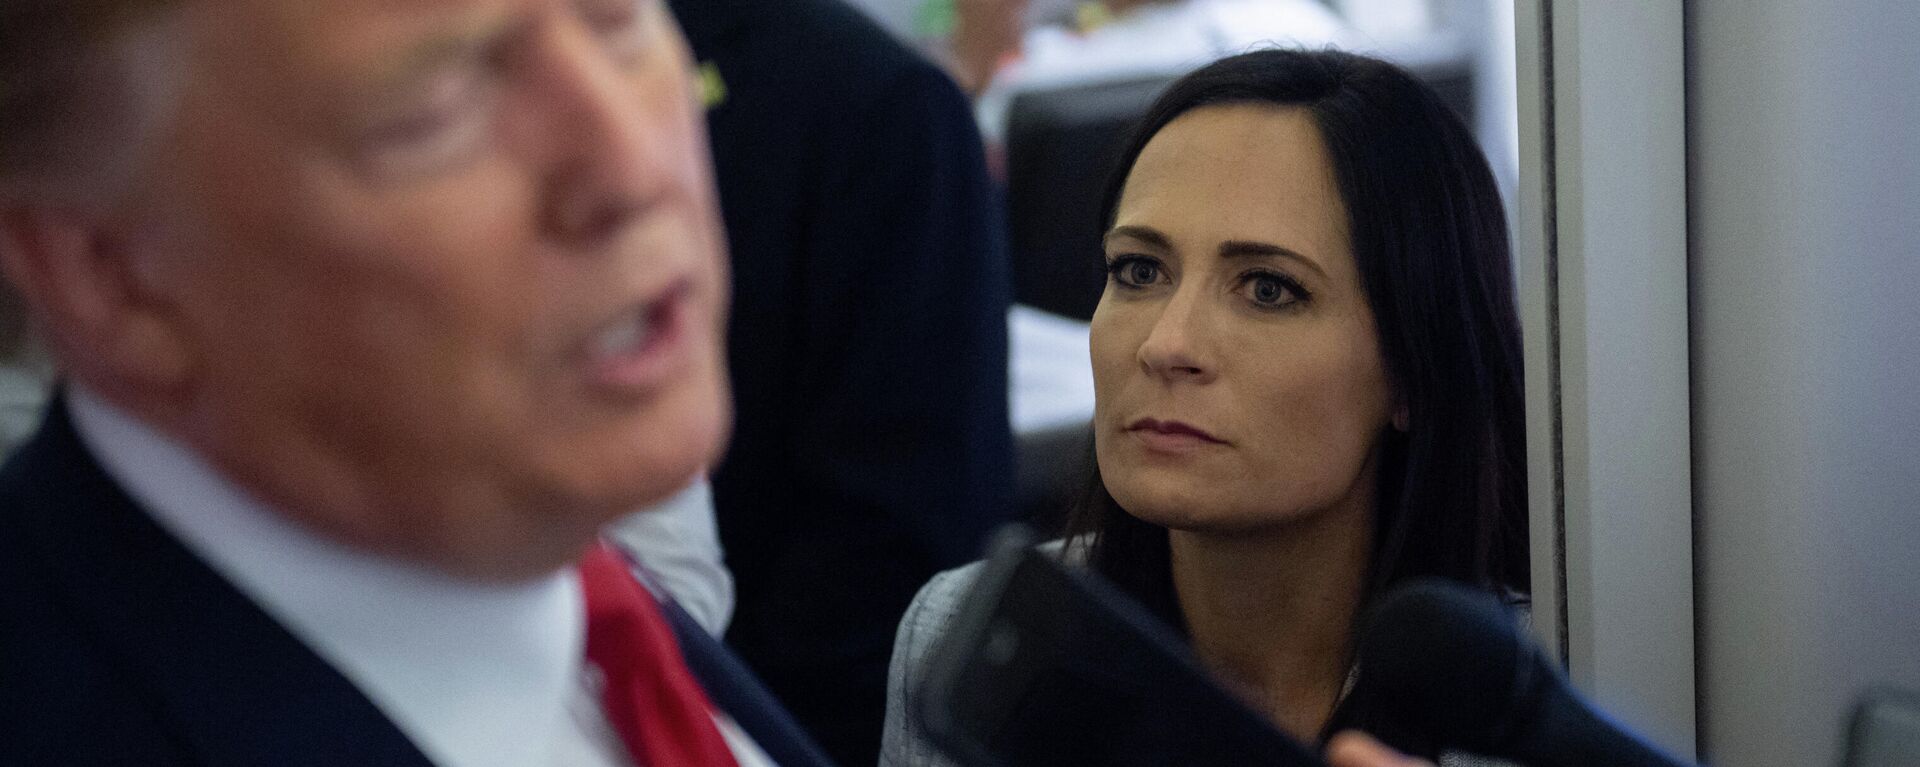 In this file photo former White House Press Secretary Stephanie Grisham listens as US President Donald Trump speaks to the media aboard Air Force One while flying between El Paso, Texas and Joint Base Andrews in Maryland, August 7, 2019. - An aide dubbed the Music Man was tasked with playing calming tunes for Donald Trump when he went into rages, according to a scandal-filled book by a former press secretary.Stephanie Grisham, notorious for not giving a single televised press conference while serving as Trump's chief spokeswoman, writes in I'll Take Your Questions Now that her boss went into terrifying rants.The former president and his wife Melania have vociferously condemned the book, excerpts of which appeared on September 28, 2021 in The New York Times and Washington Post. - Sputnik International, 1920, 04.10.2021